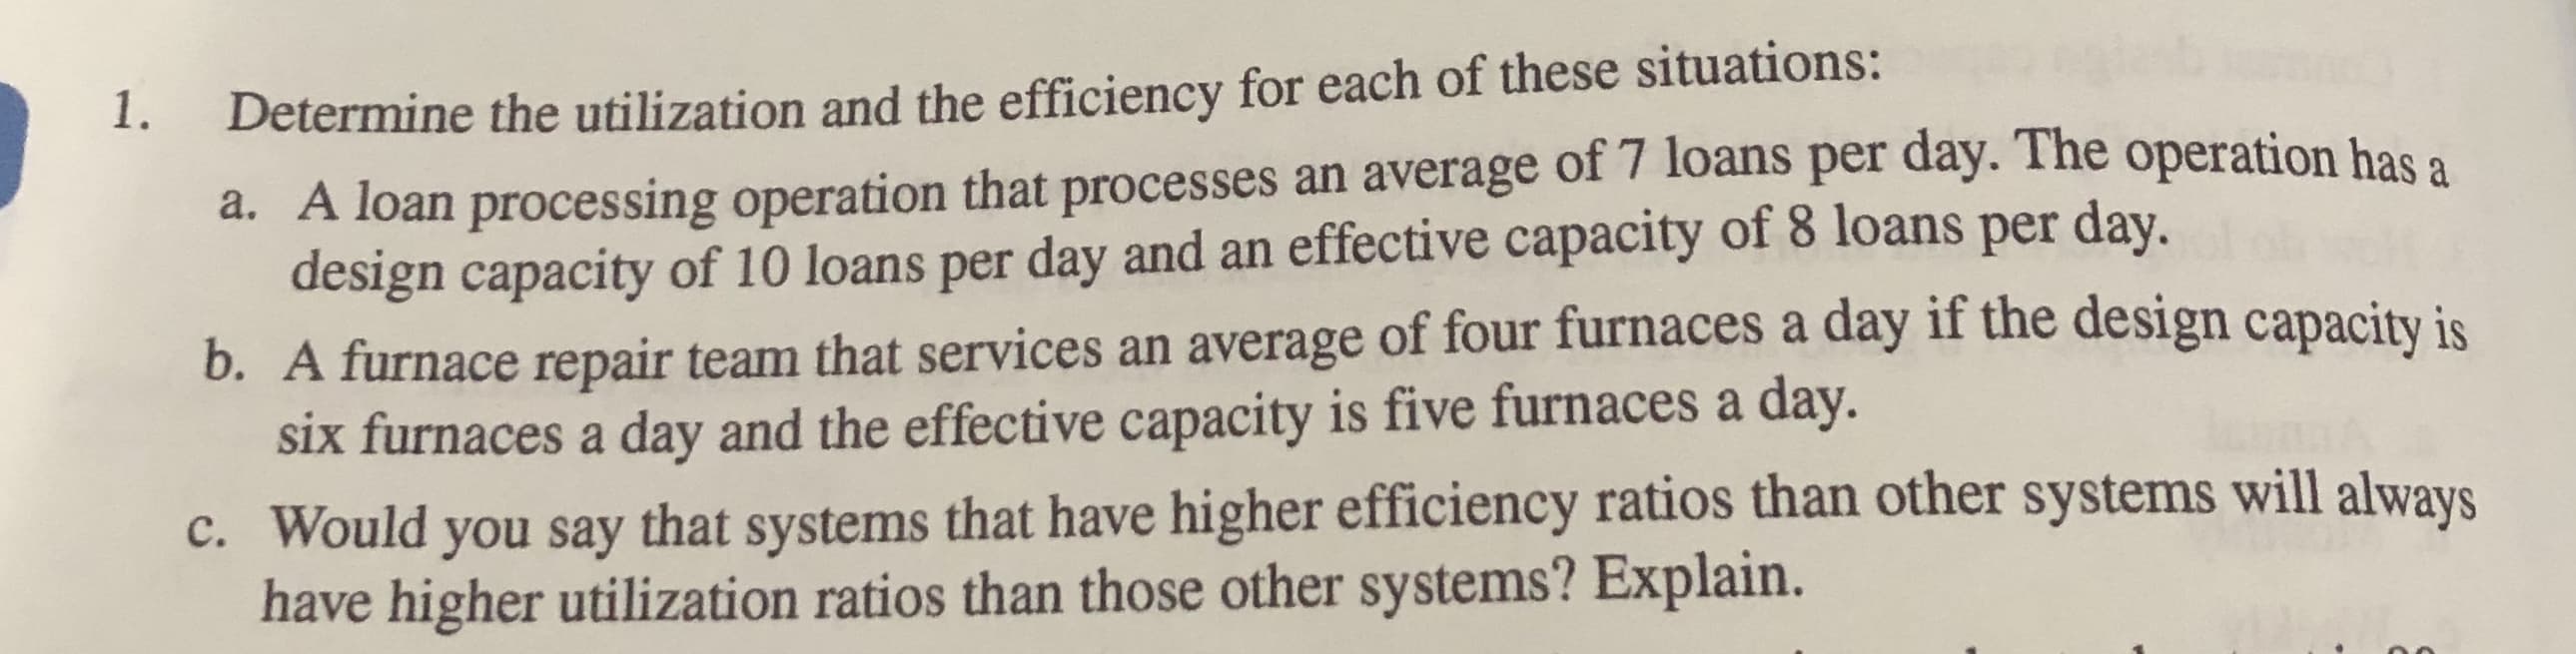 Determine the utilization and the efficiency for each of these situations:
a. A loan processing operation that processes an average of 7 loans per day. The operation has a
design capacity of 10 loans per day and an effective capacity of 8 loans per day.
b. A furnace repair team that services an average of four furnaces a day if the design capacity is
six furnaces a day and the effective capacity is five furnaces a day.
c. Would you say that systems that have higher efficiency ratios than other systems will always
have higher utilization ratios than those other systems? Explain.
